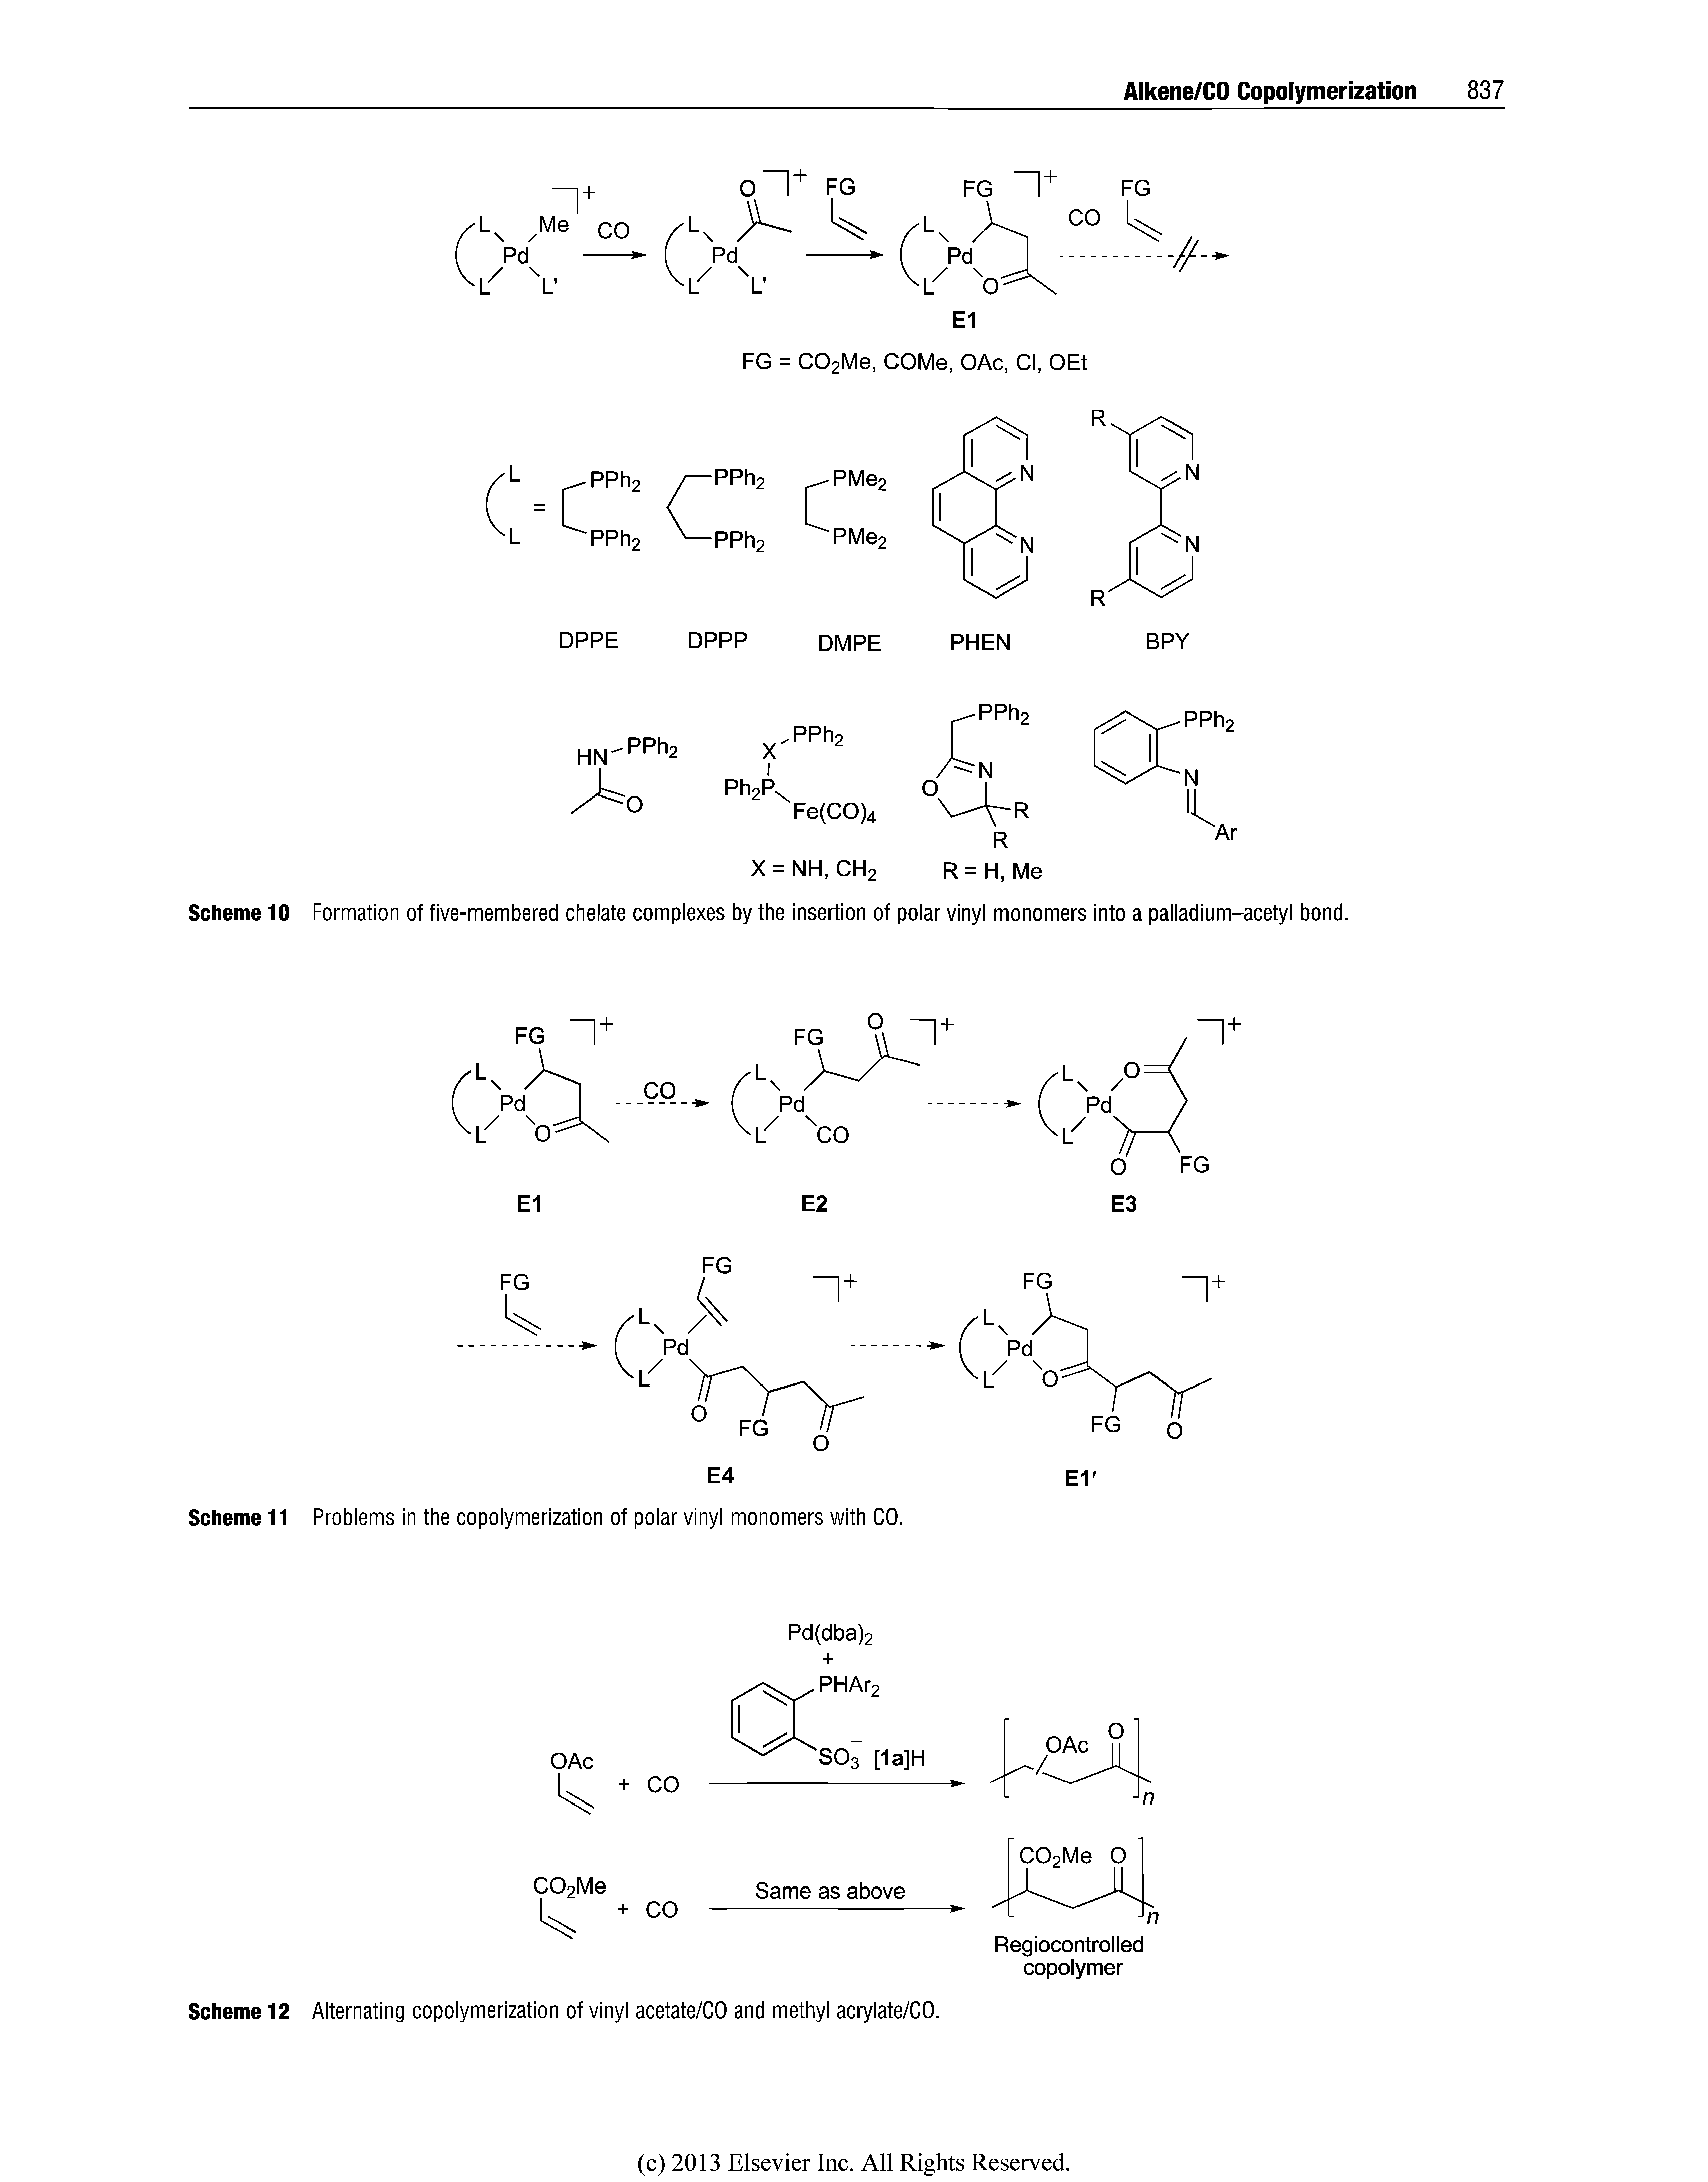 Scheme 10 Formation of five-membered chelate complexes by the insertion of polar vinyl monomers into a palladium-acetyl bond.